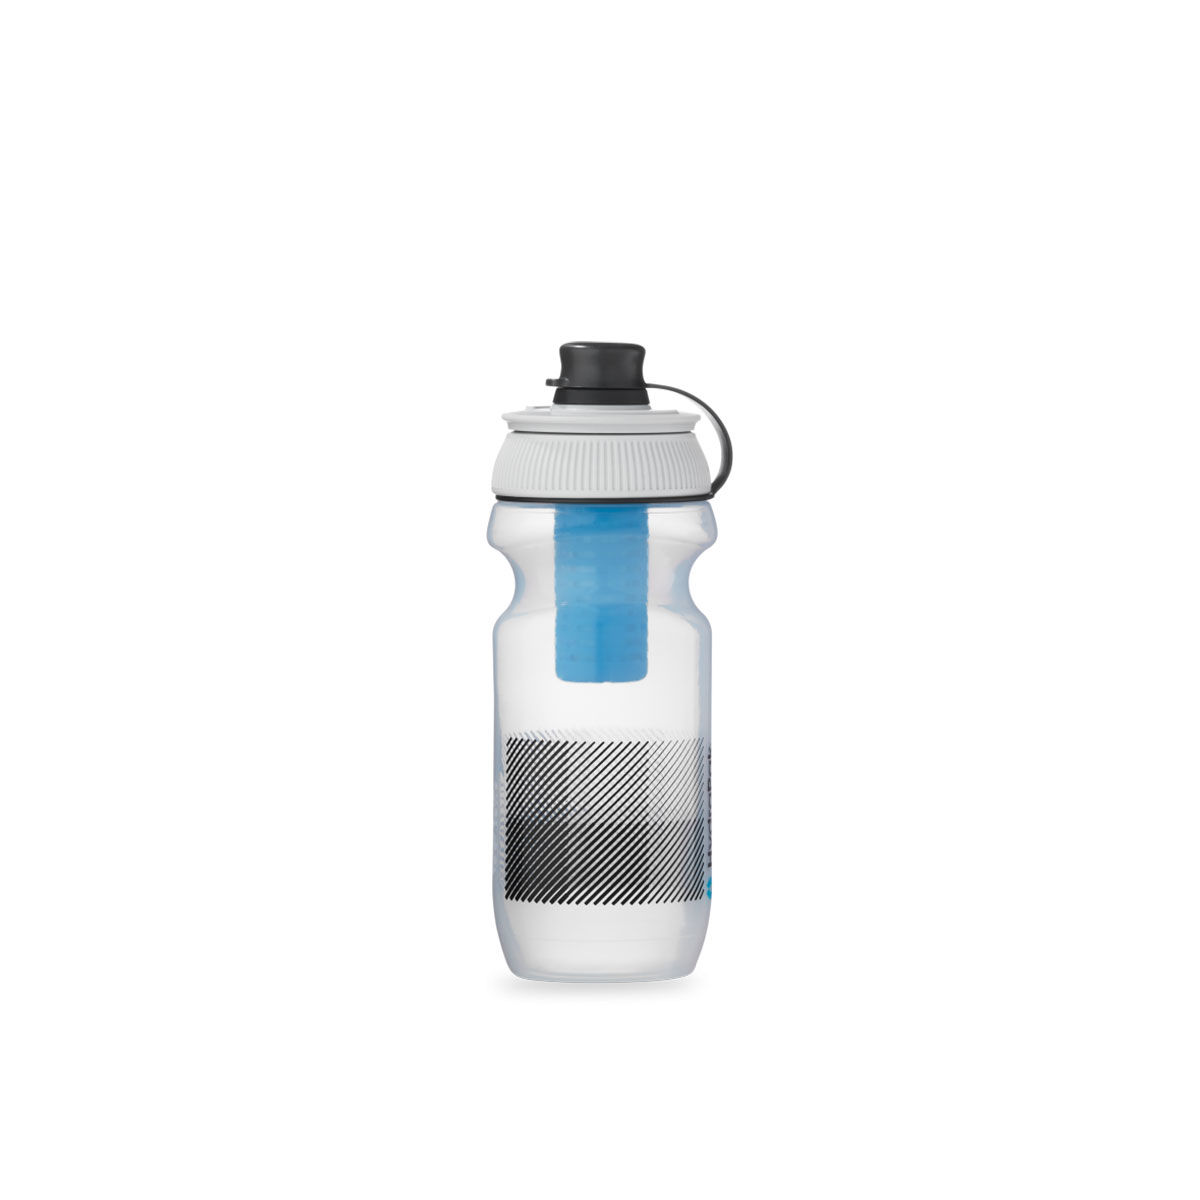 Hydrapak Breakaway water bottle with integrated water filter